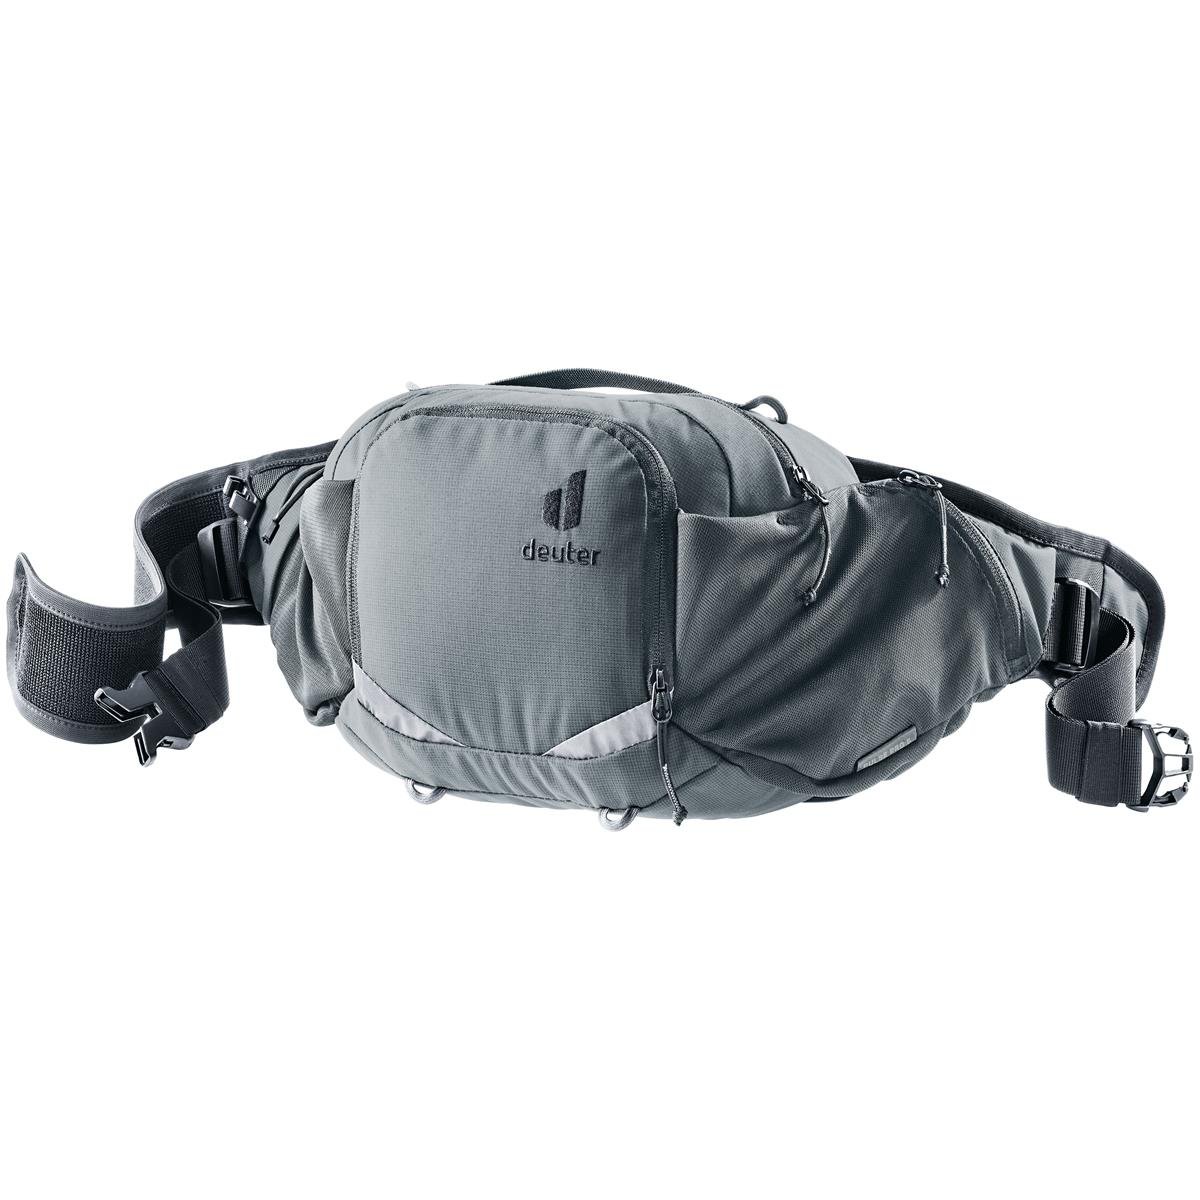 Deuter Hip Pack with Hydration System Compartment Pulse Pro 5 Graphite